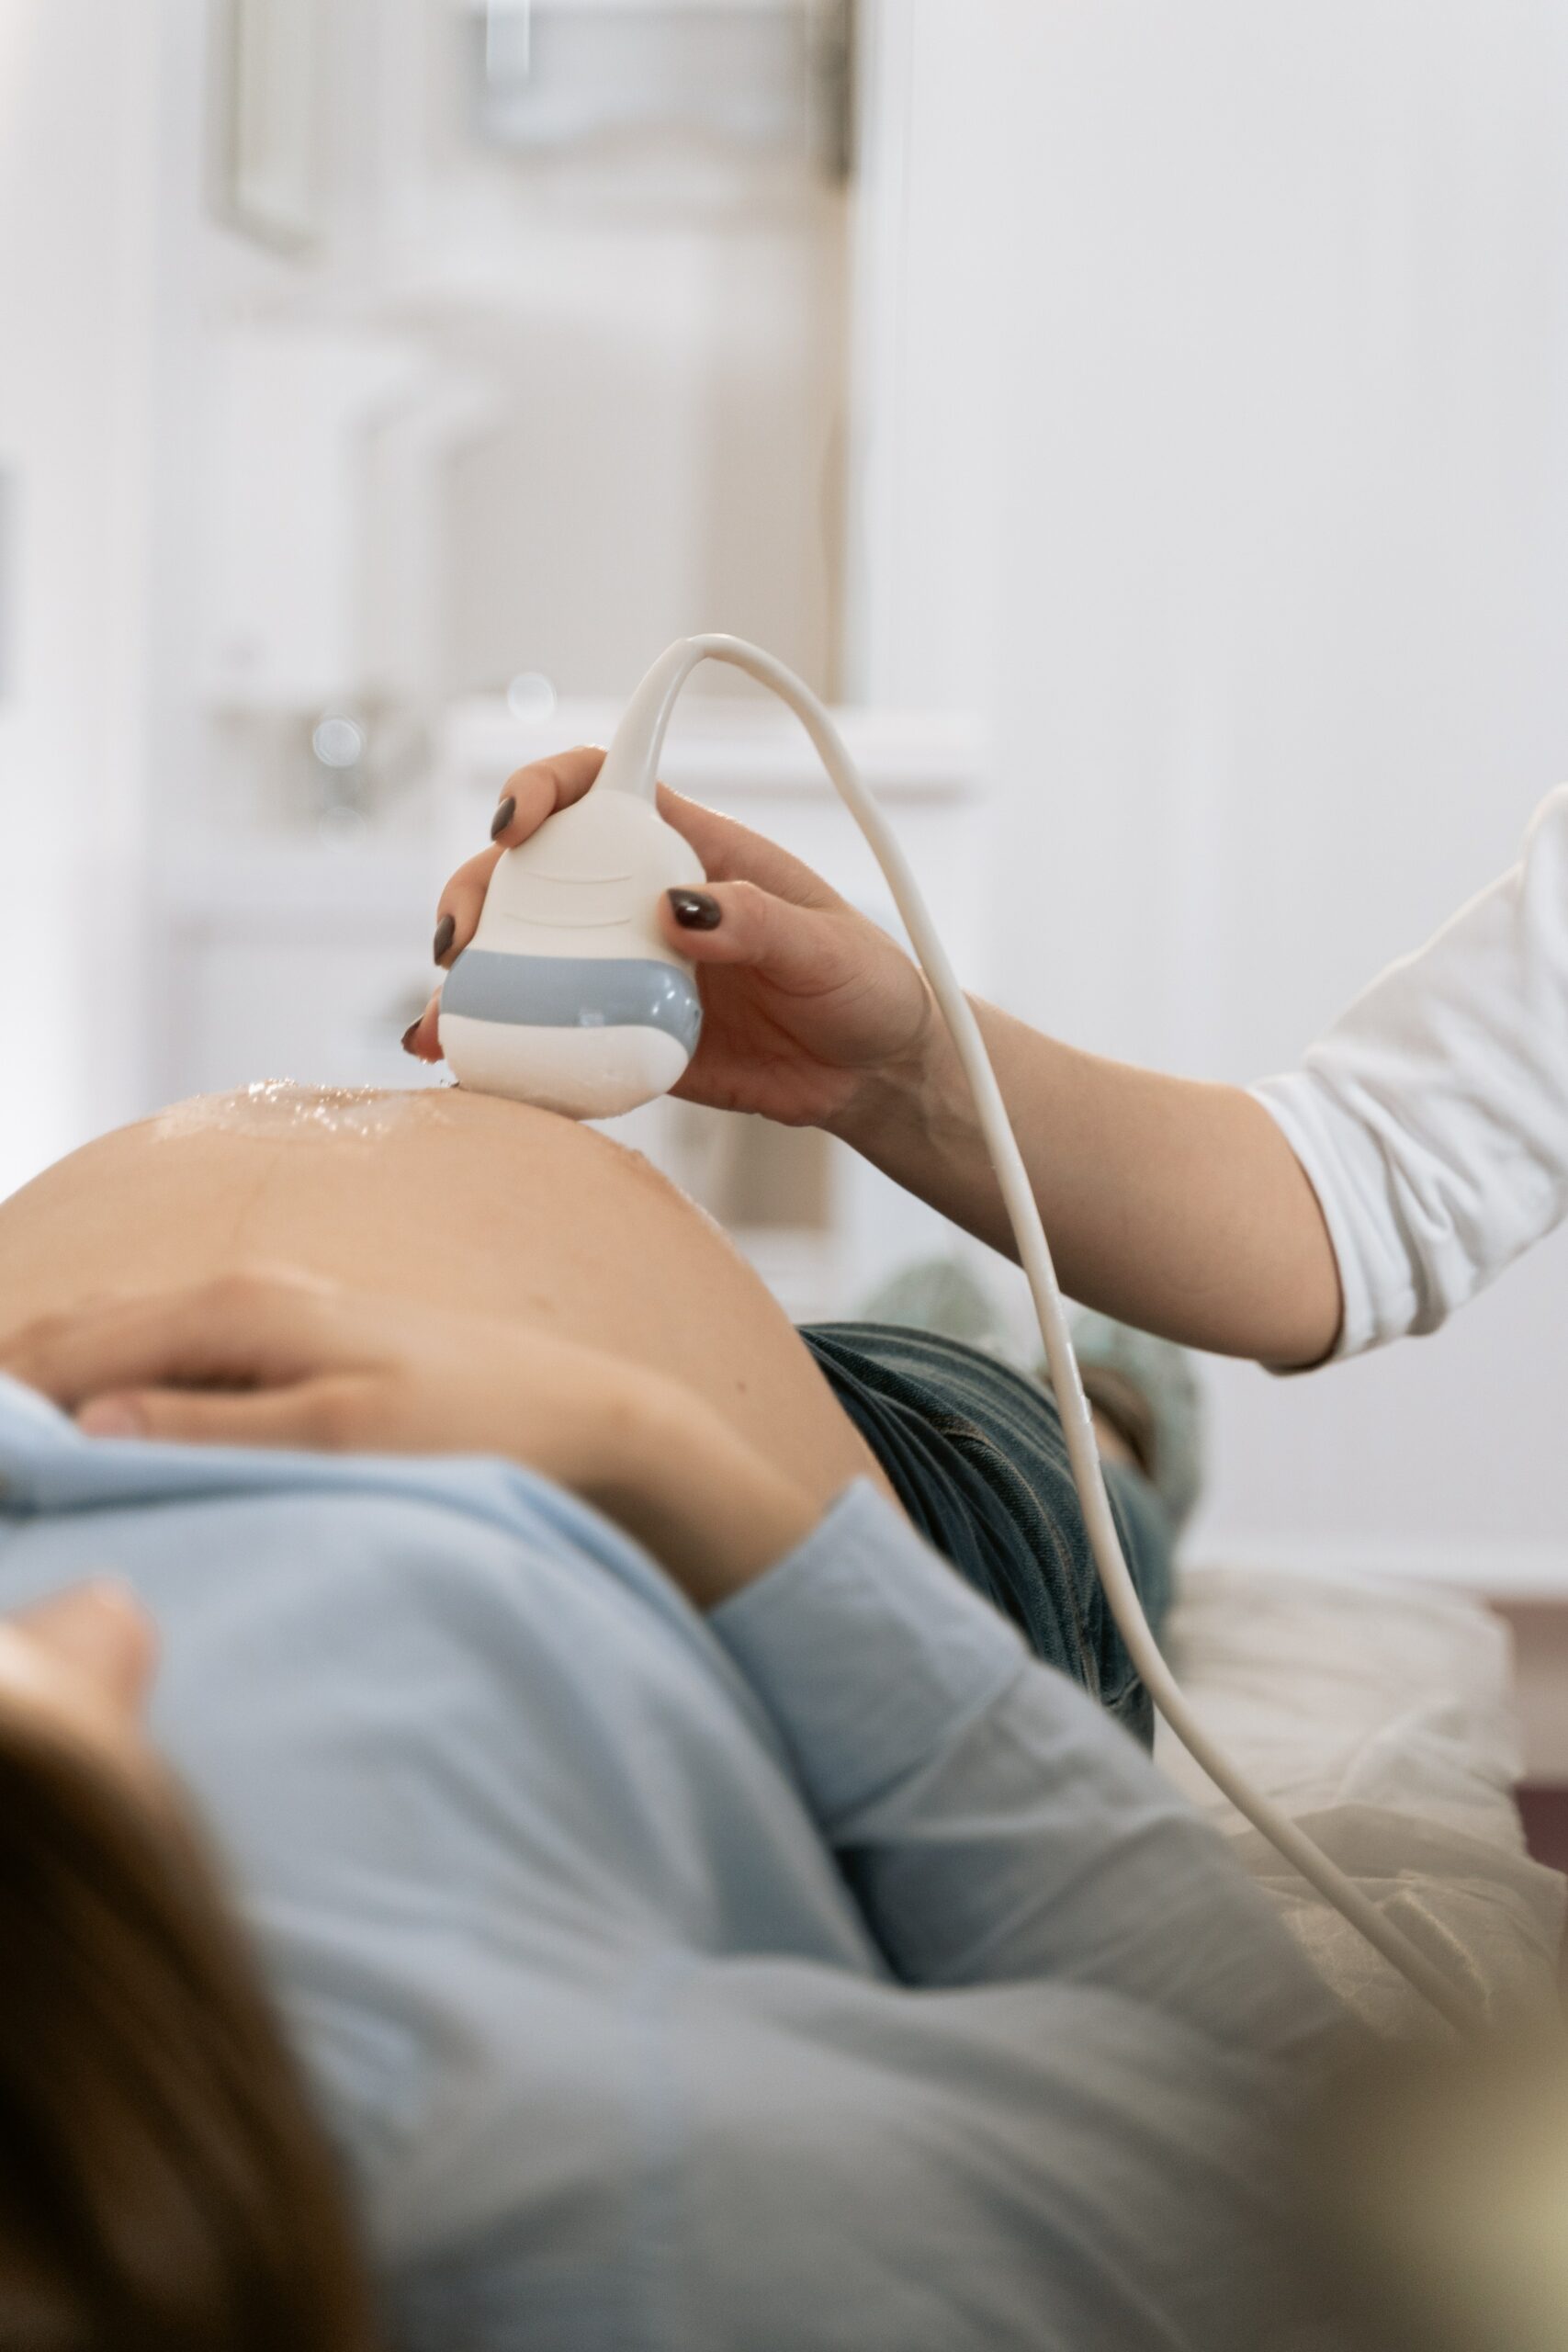 Pregnant woman at the doctor's office getting an ultrasound